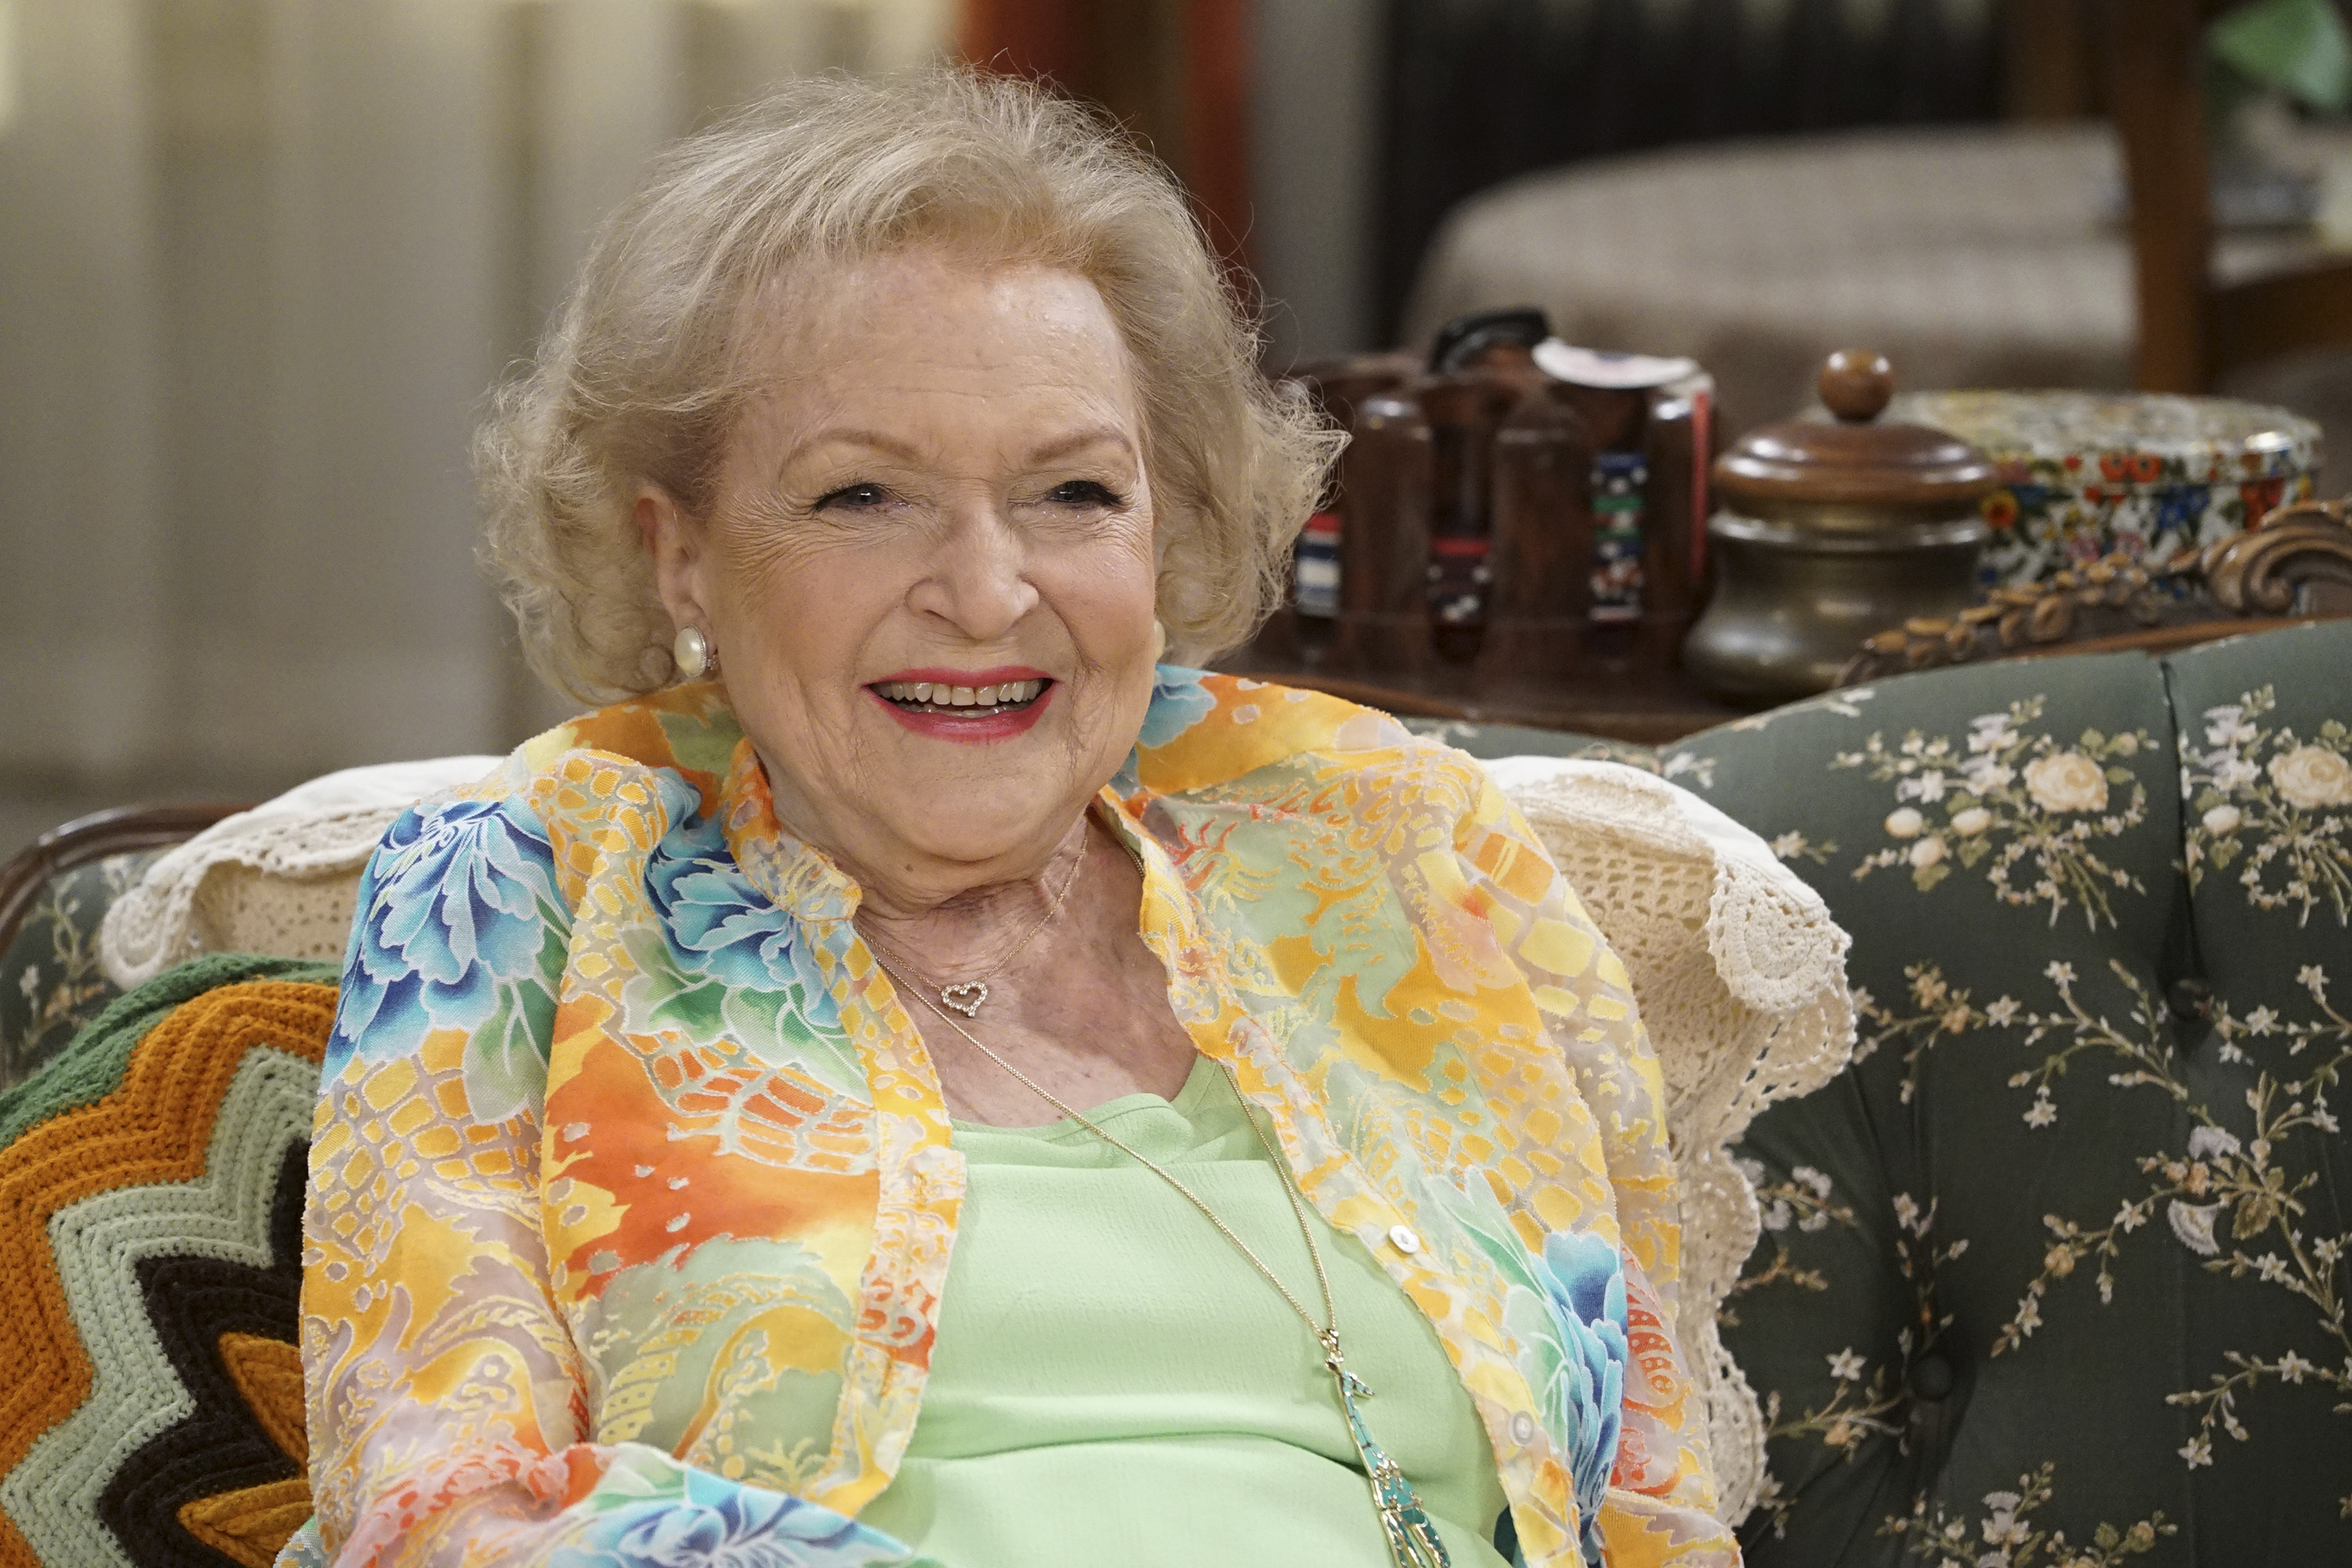 Betty White wearing a green shirt and floral blouse; sits on a couch.